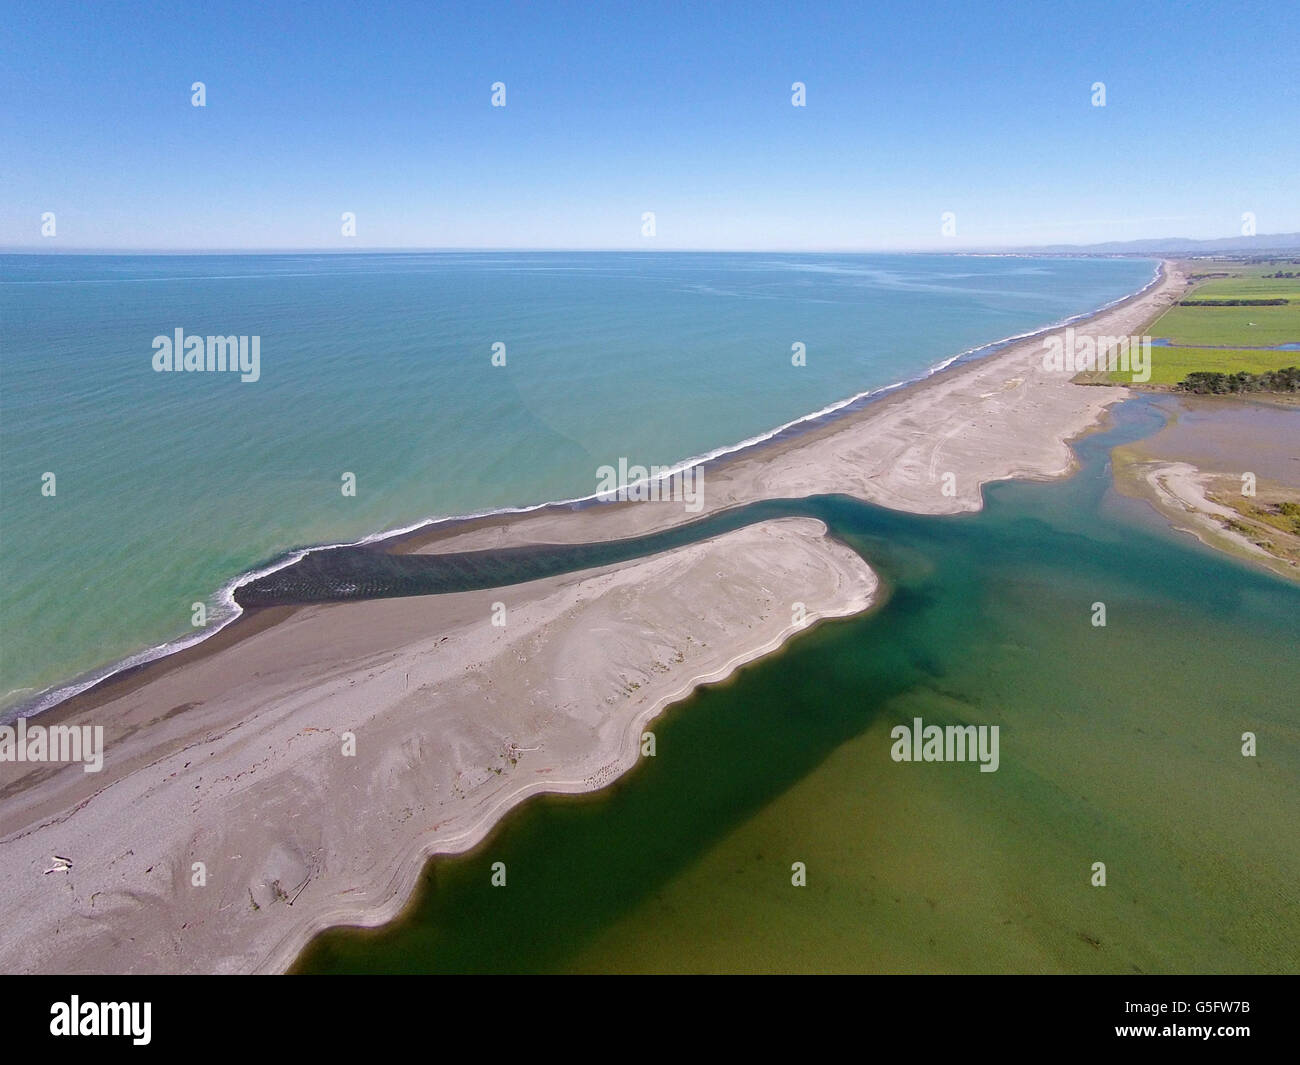 Opihi River Mouth, near Temuka, South Canterbury, South Island, New Zealand - drone aerial Stock Photo